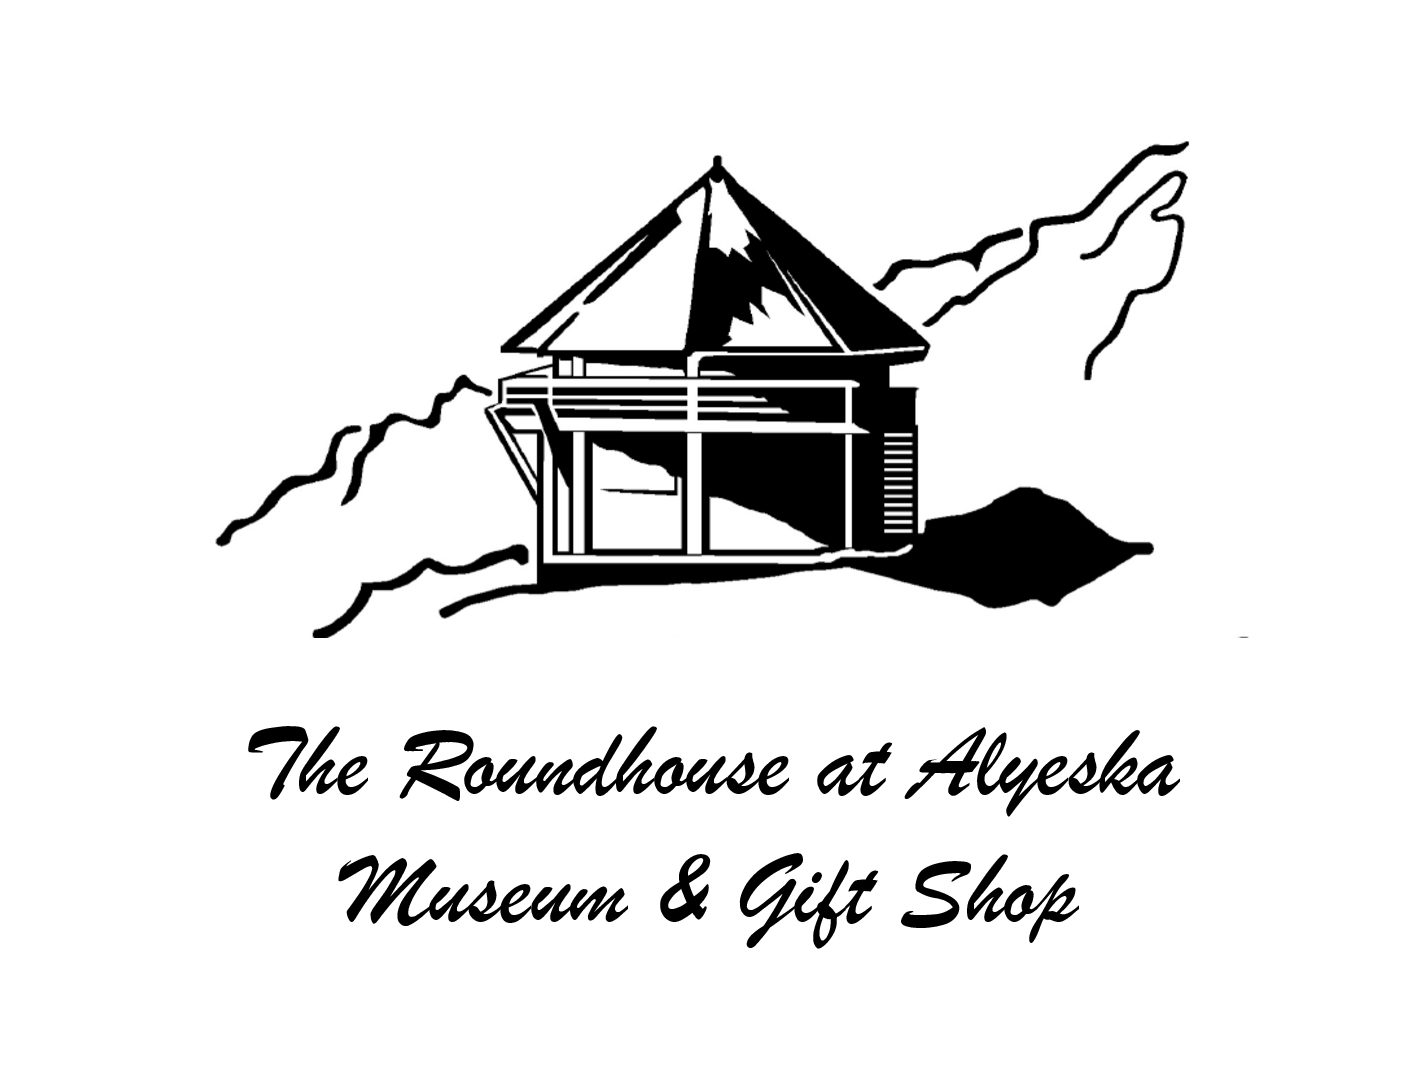 The Roadhouse at Alyeska Museum & Gift Shop